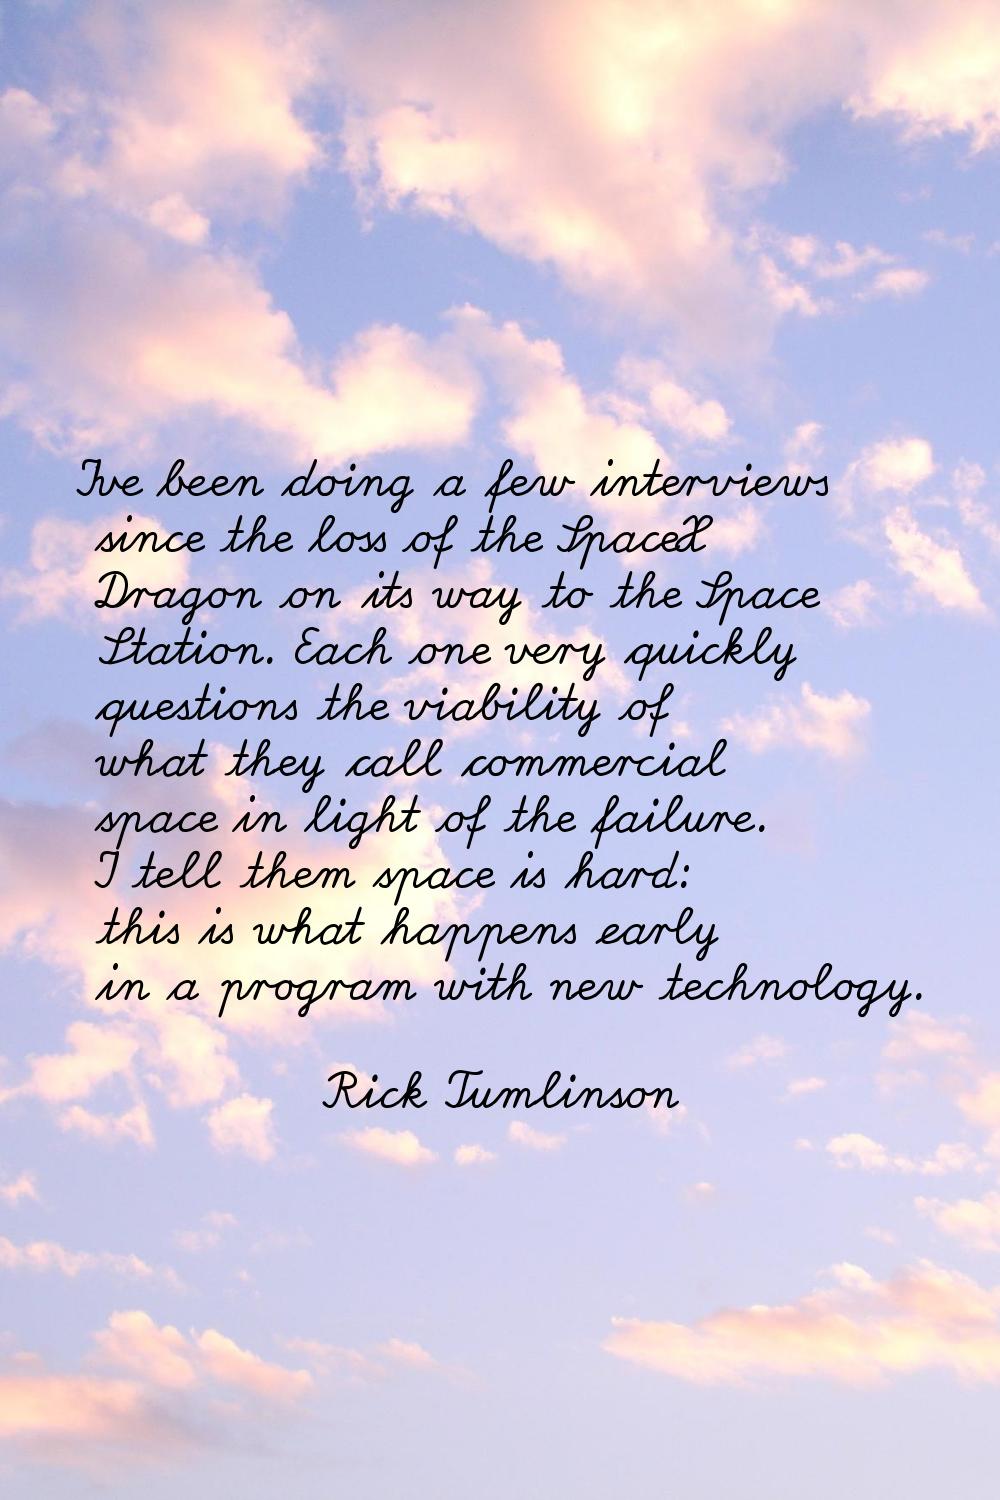 I've been doing a few interviews since the loss of the SpaceX Dragon on its way to the Space Statio